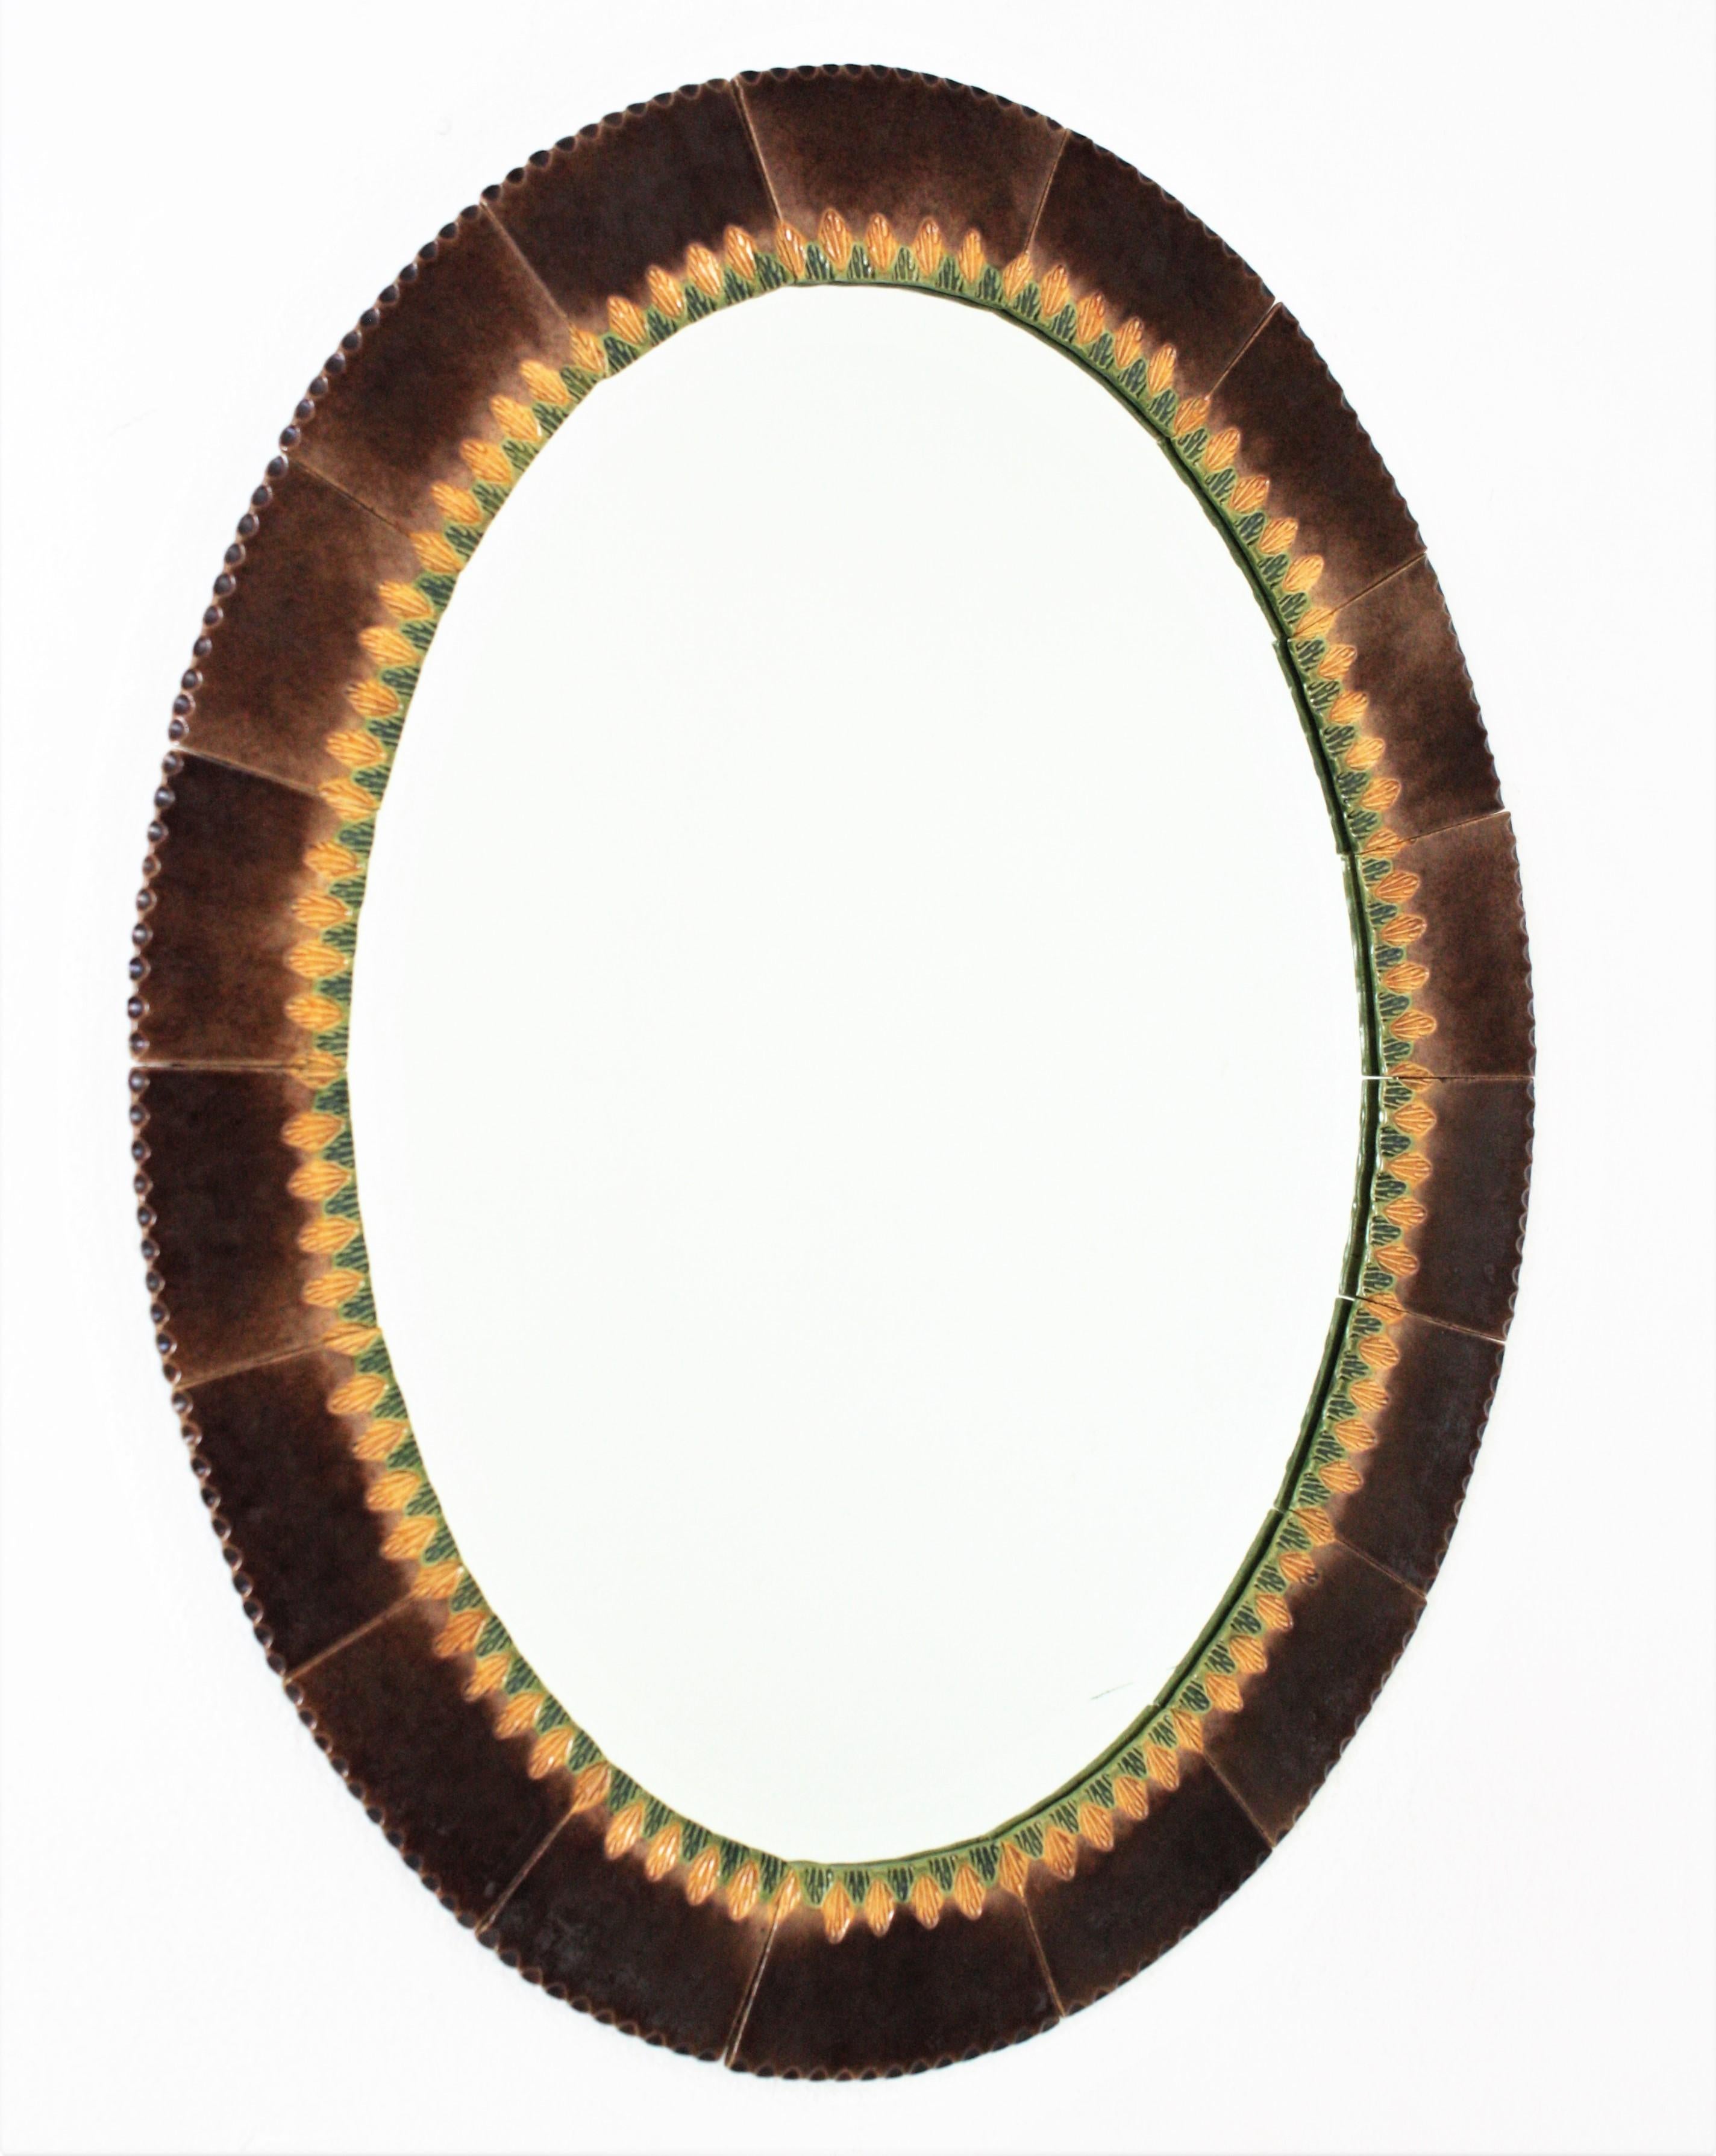 Eye-catching large ceramic mirror. Maufactured in Spain, 1960s.
Oval Shape and large glass mirror surface.
The frame is made of glazed ceramic tiles in shades of brown. A decorative pattern in green an yellow surrounds the glass mirror.
This wall